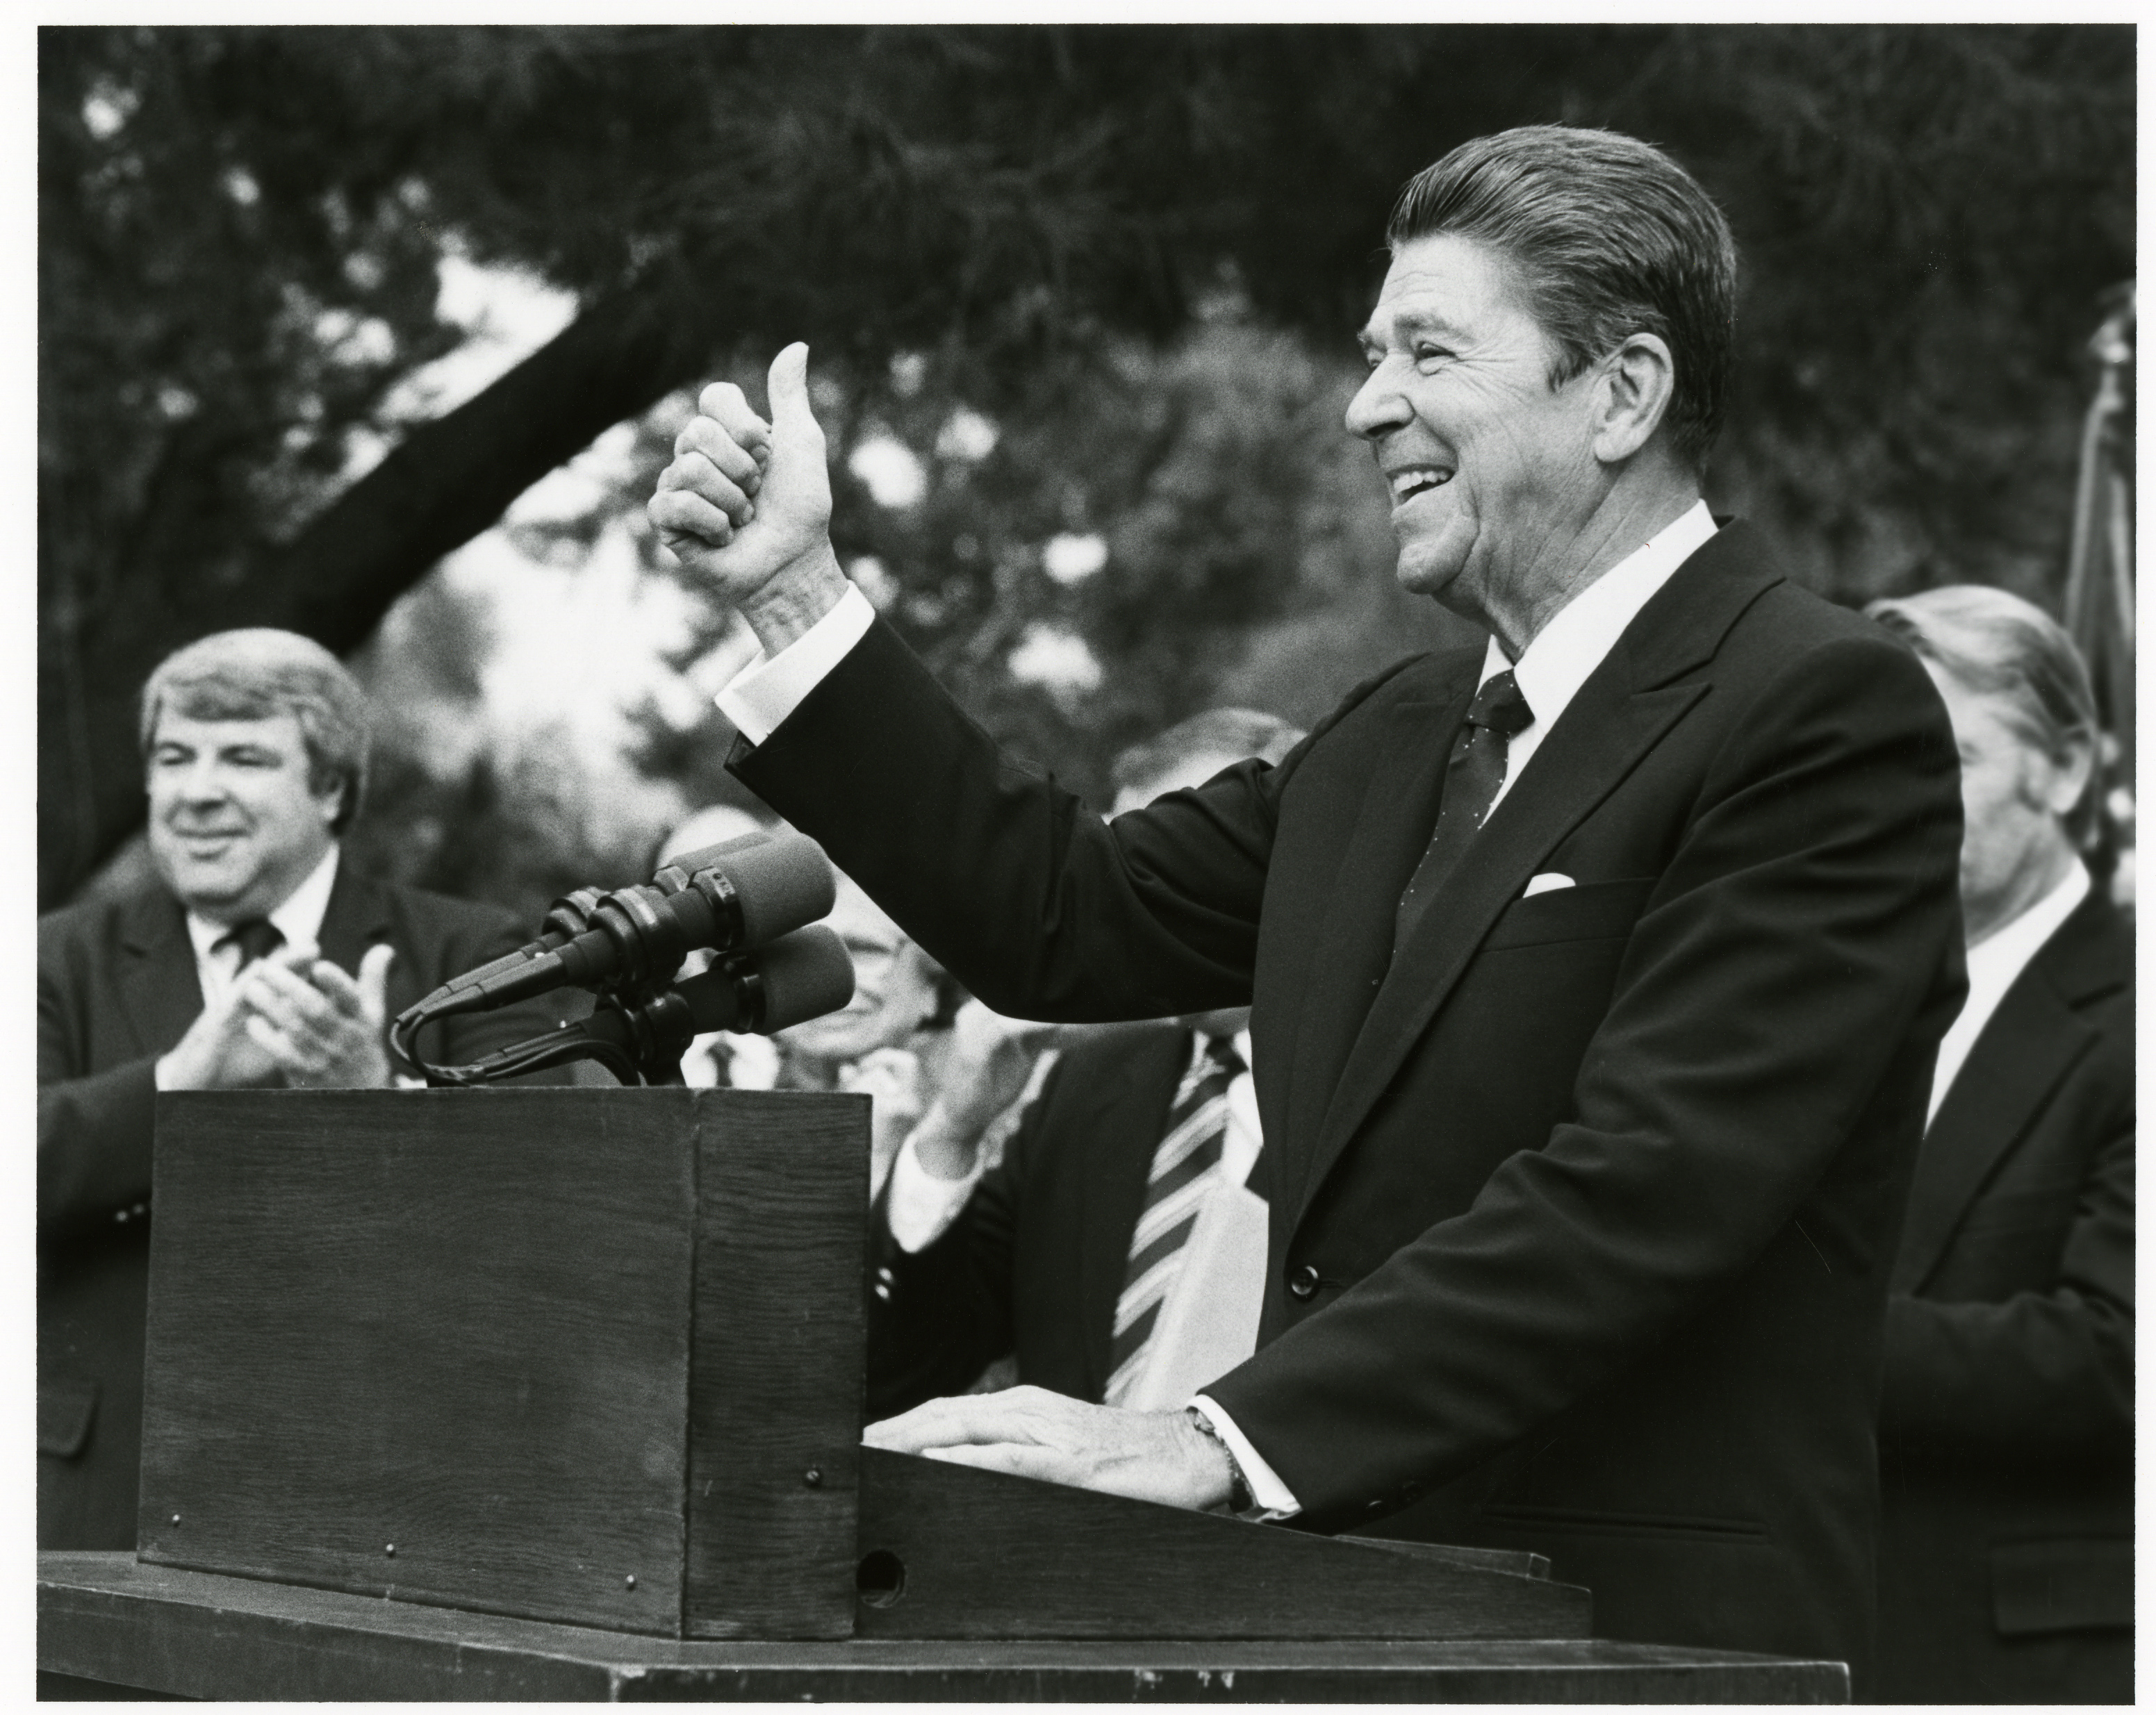 Ronald Reagan campaigning -“Thumbs up” at Claremont Colleges